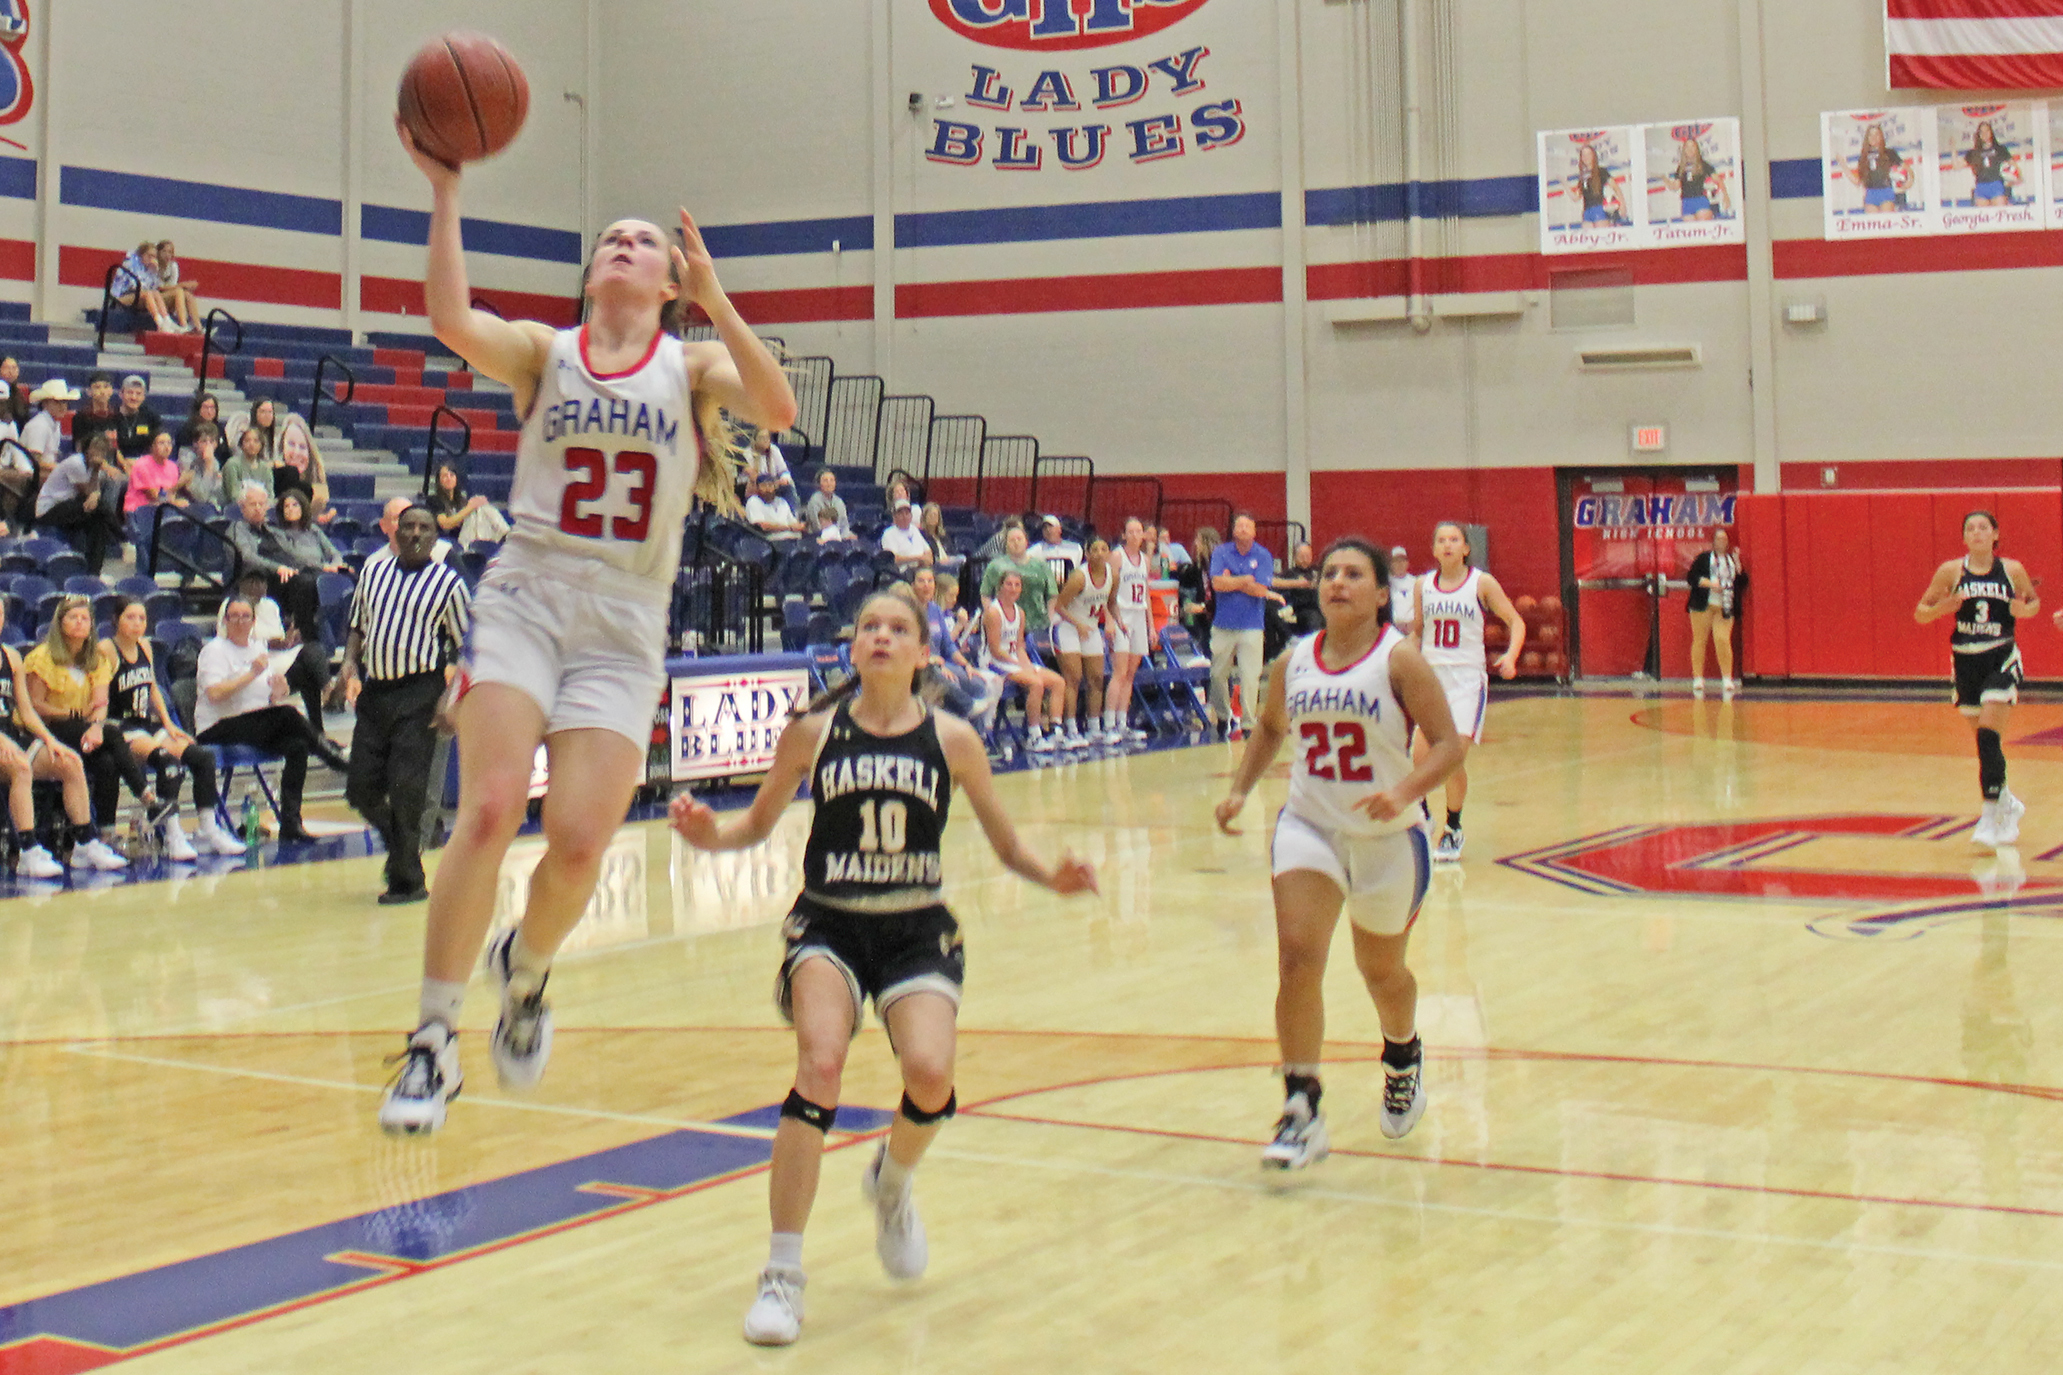 Late run ends Lady Blues comeback bid with Stamford